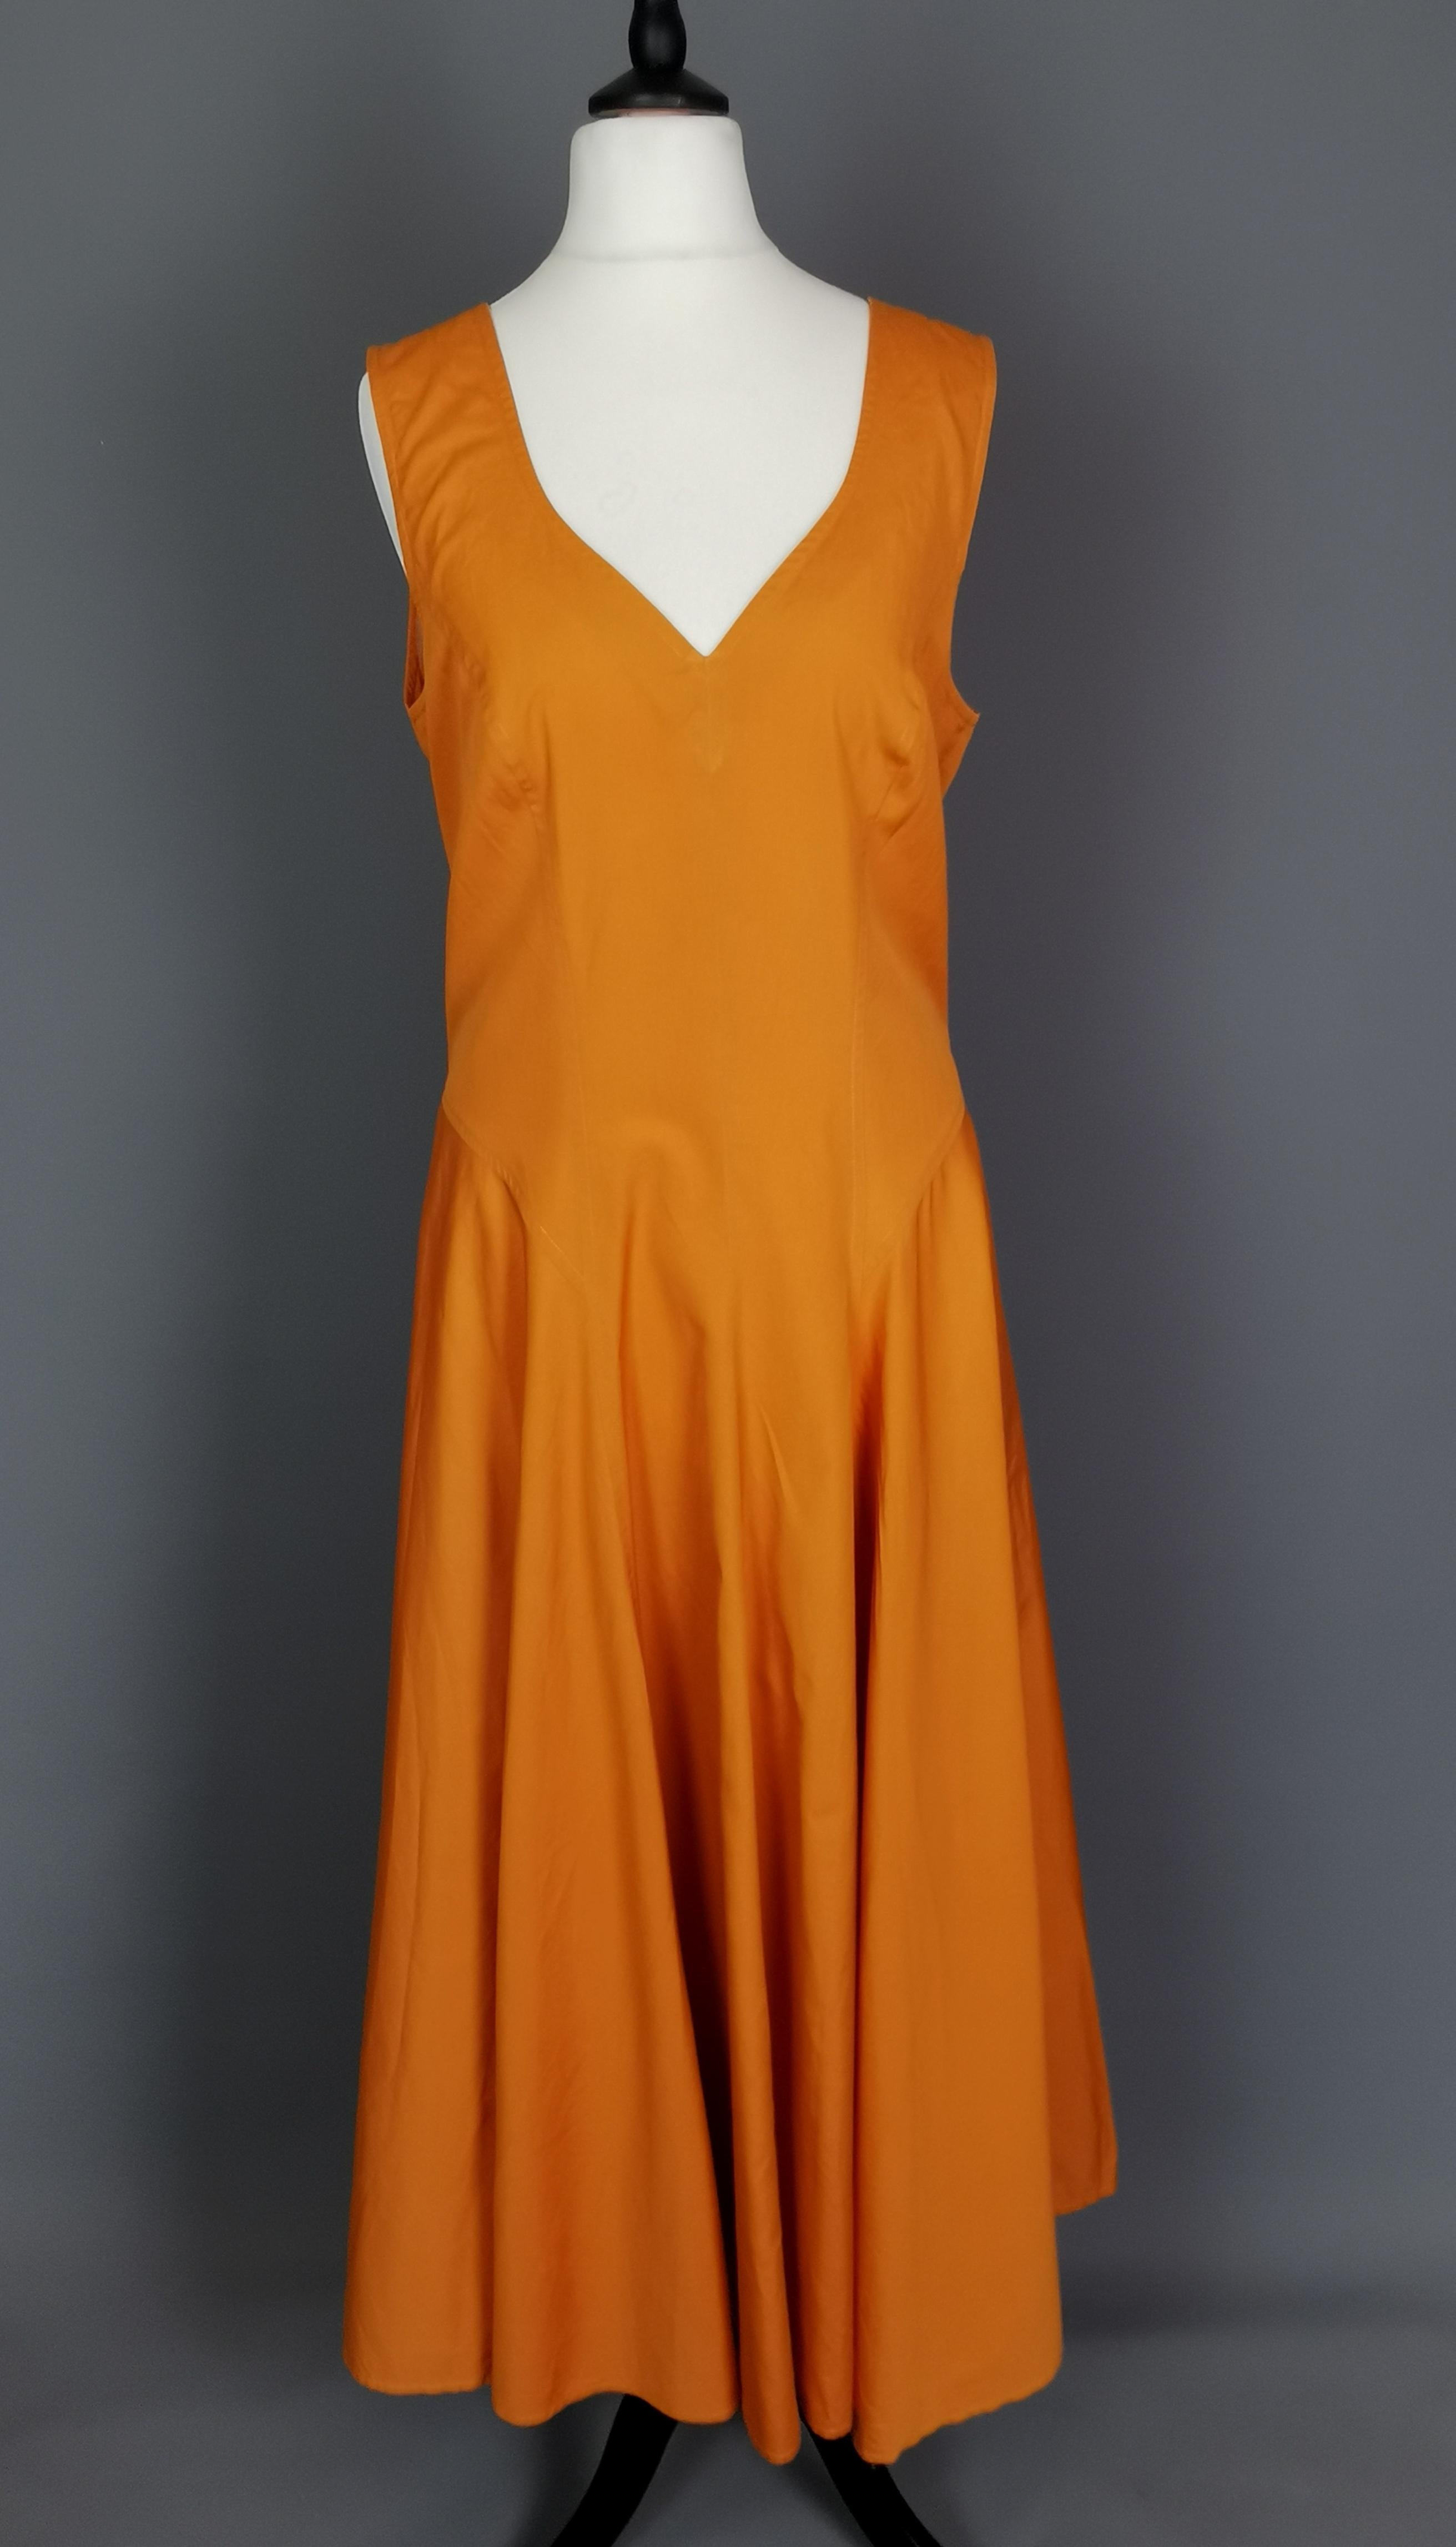 A gorgeous vintage c1980s Kenzo burnt orange sun dress.

A lovely floaty summer dress, sleeveless with wide straps and a c neckline.

It is slightly nipped in at the waist with full swishy skirts and a full bust.

The perfect comfy yet stylish